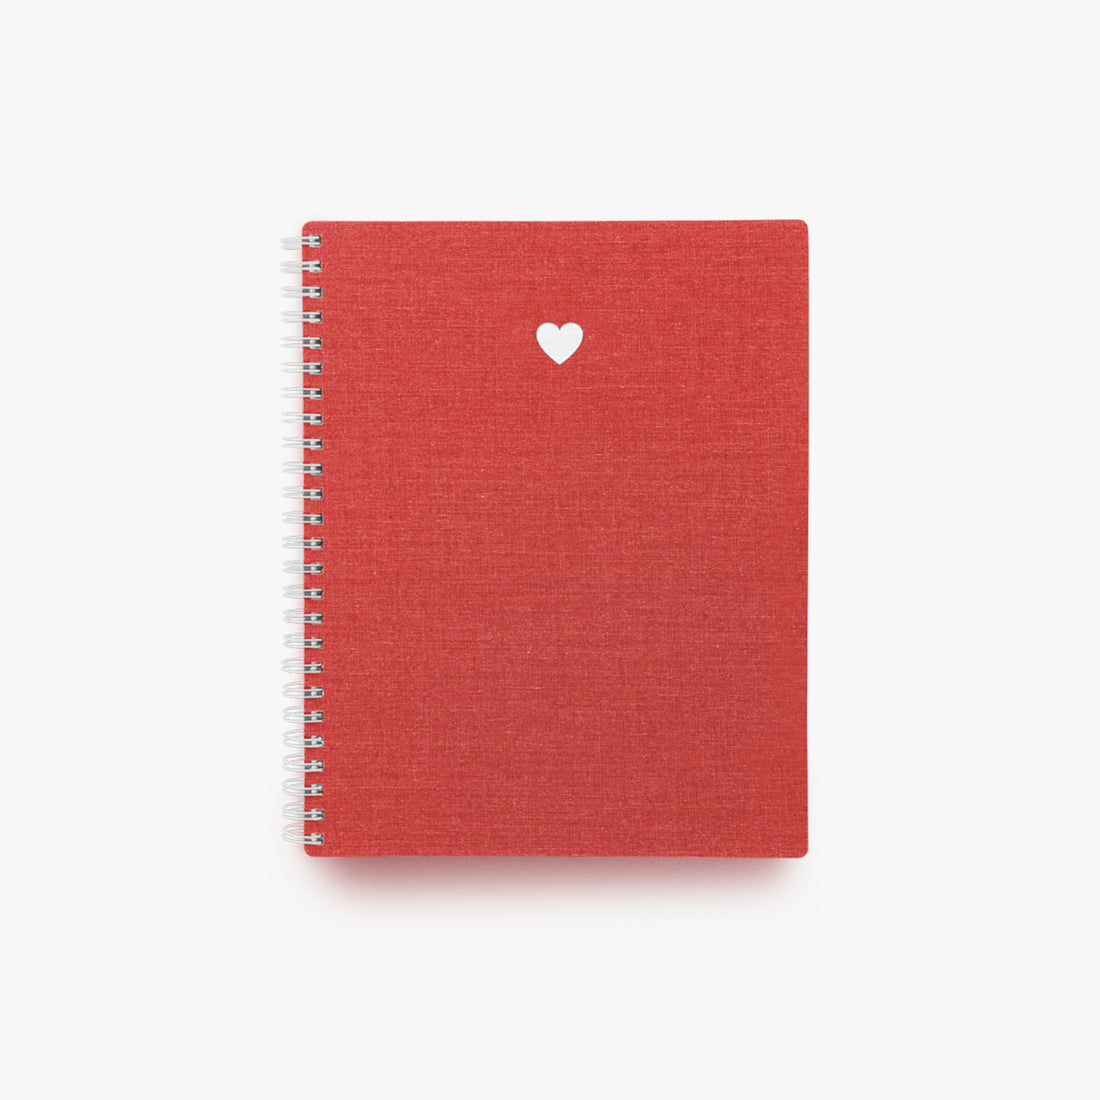 Appointed Workbook - Heart Edition